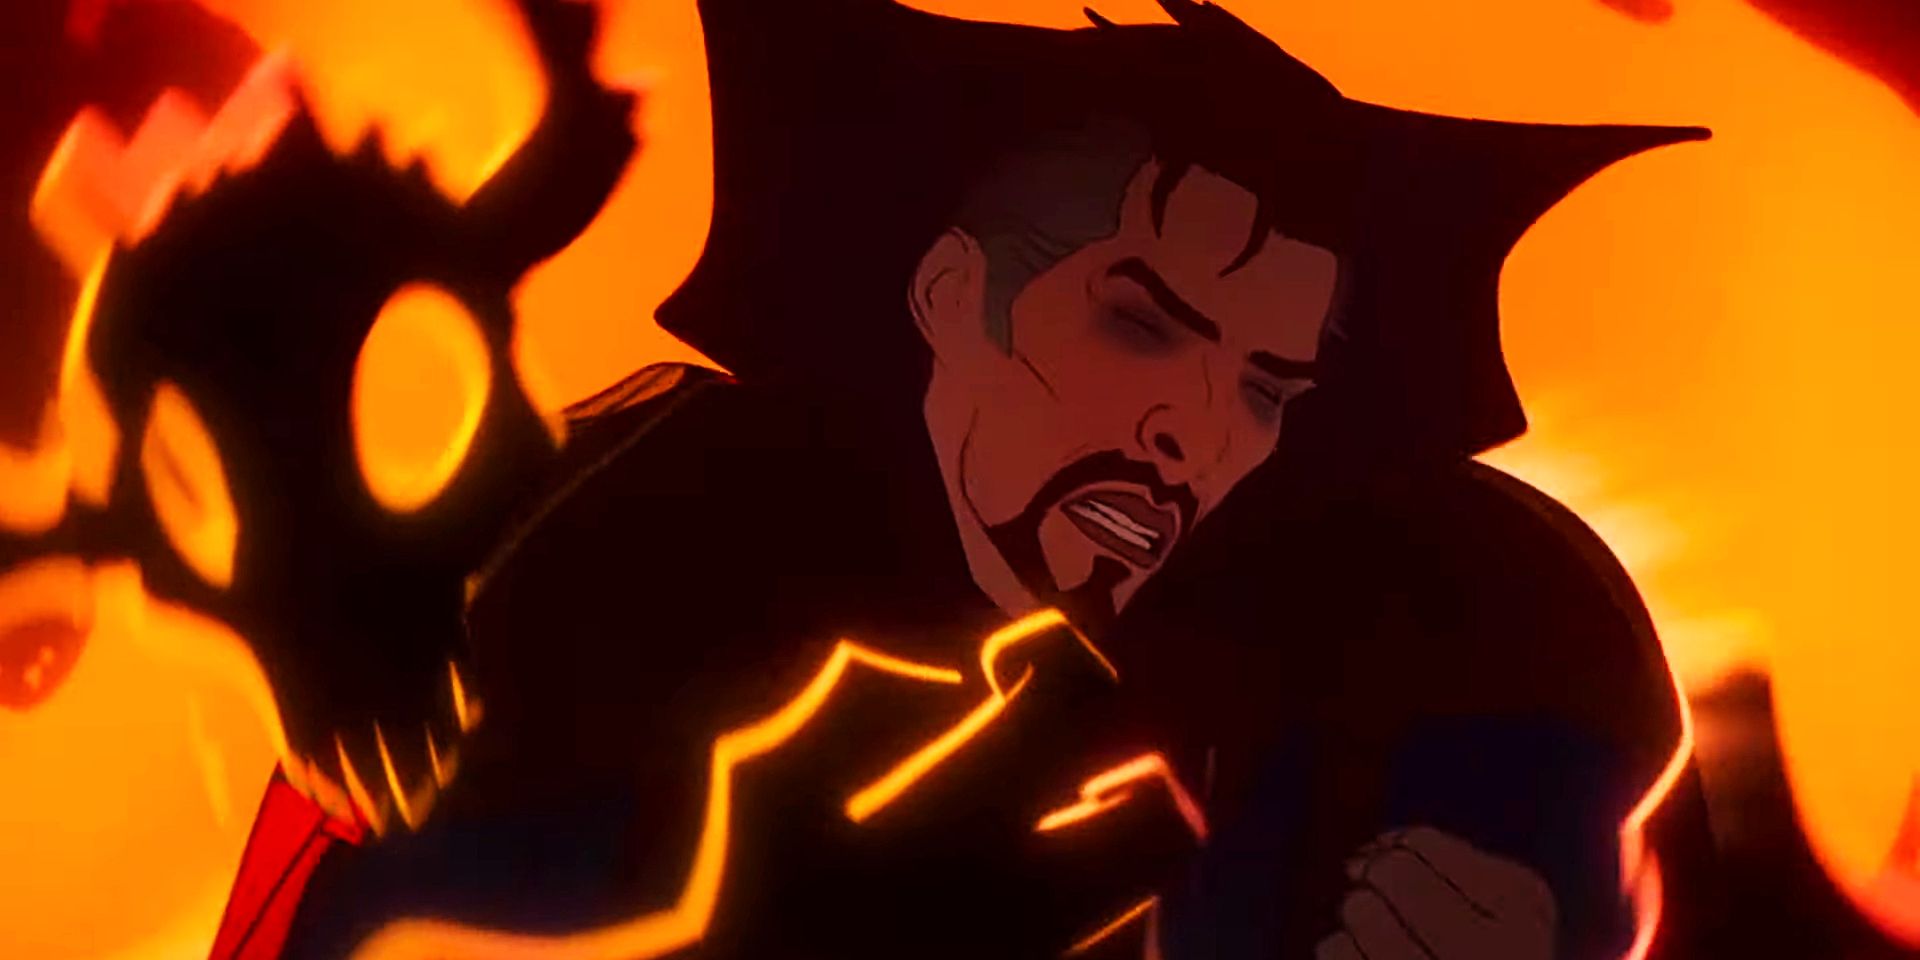 Doctor Strange closes his eyes as he is surrounded by flames in Marvel's What If...?